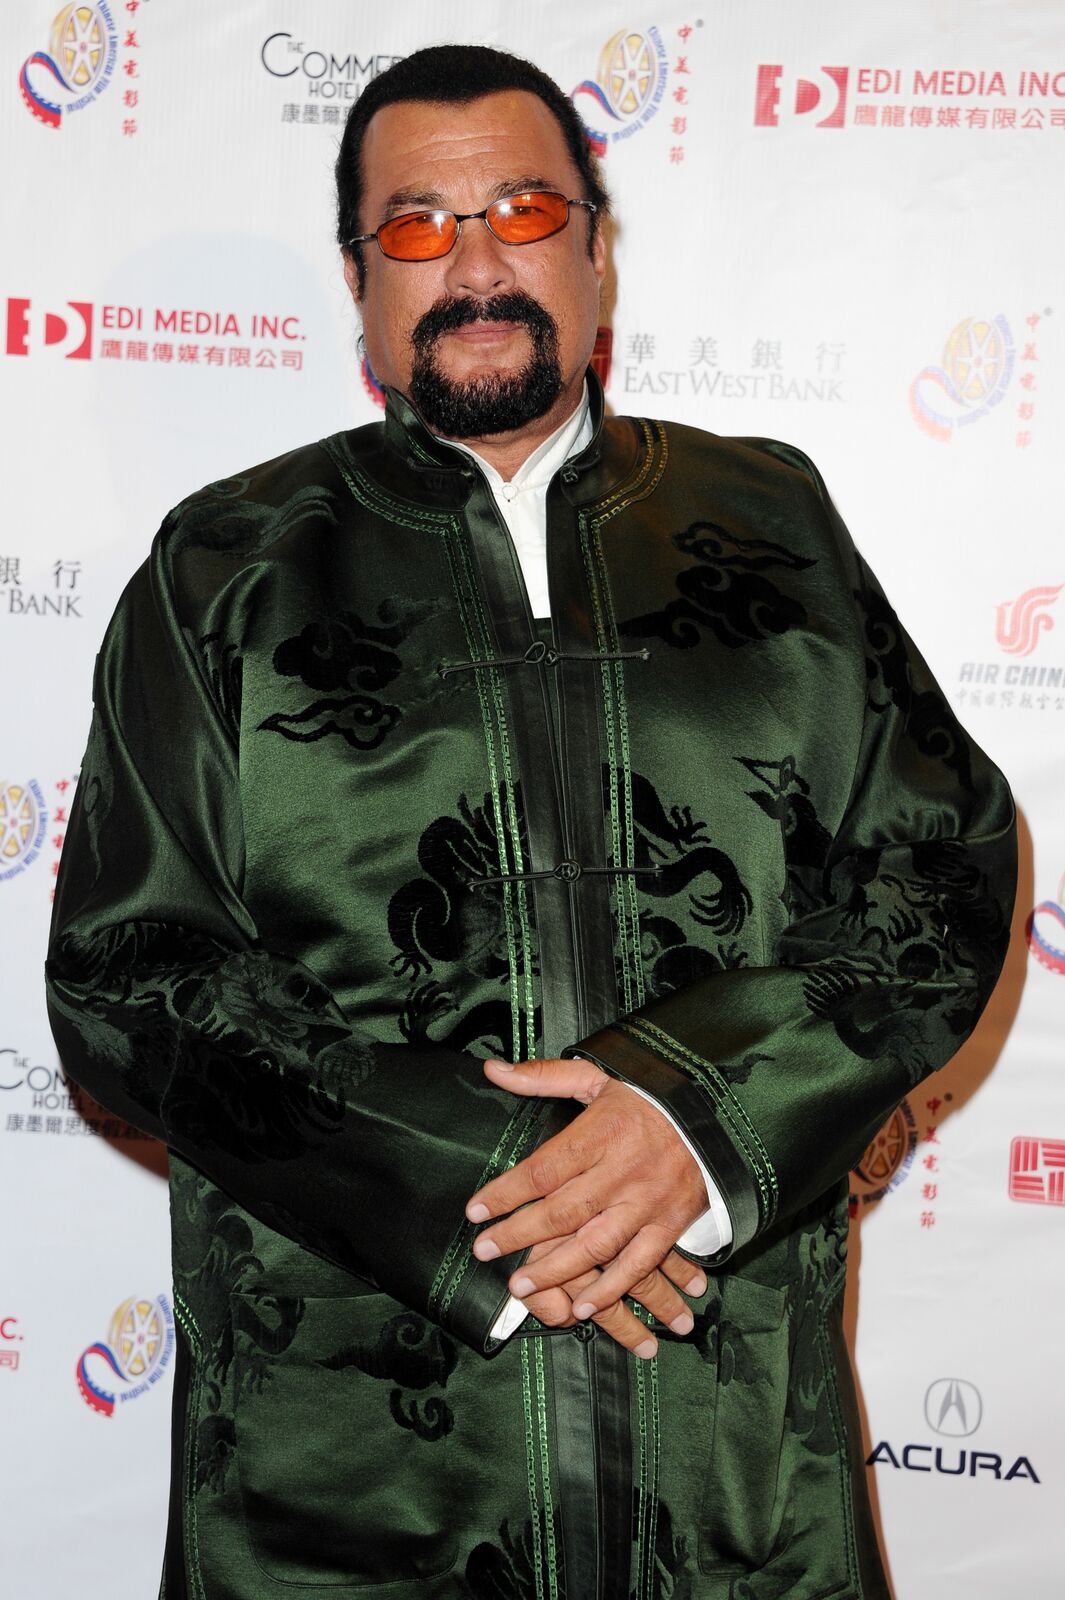 Actor Steven Seagal attends 2014 Chinese American Film Festival - Opening Night Ceremony at Pasadena Civic Auditorium on November 4, 2014 in Pasadena, California | Photo: Getty Images